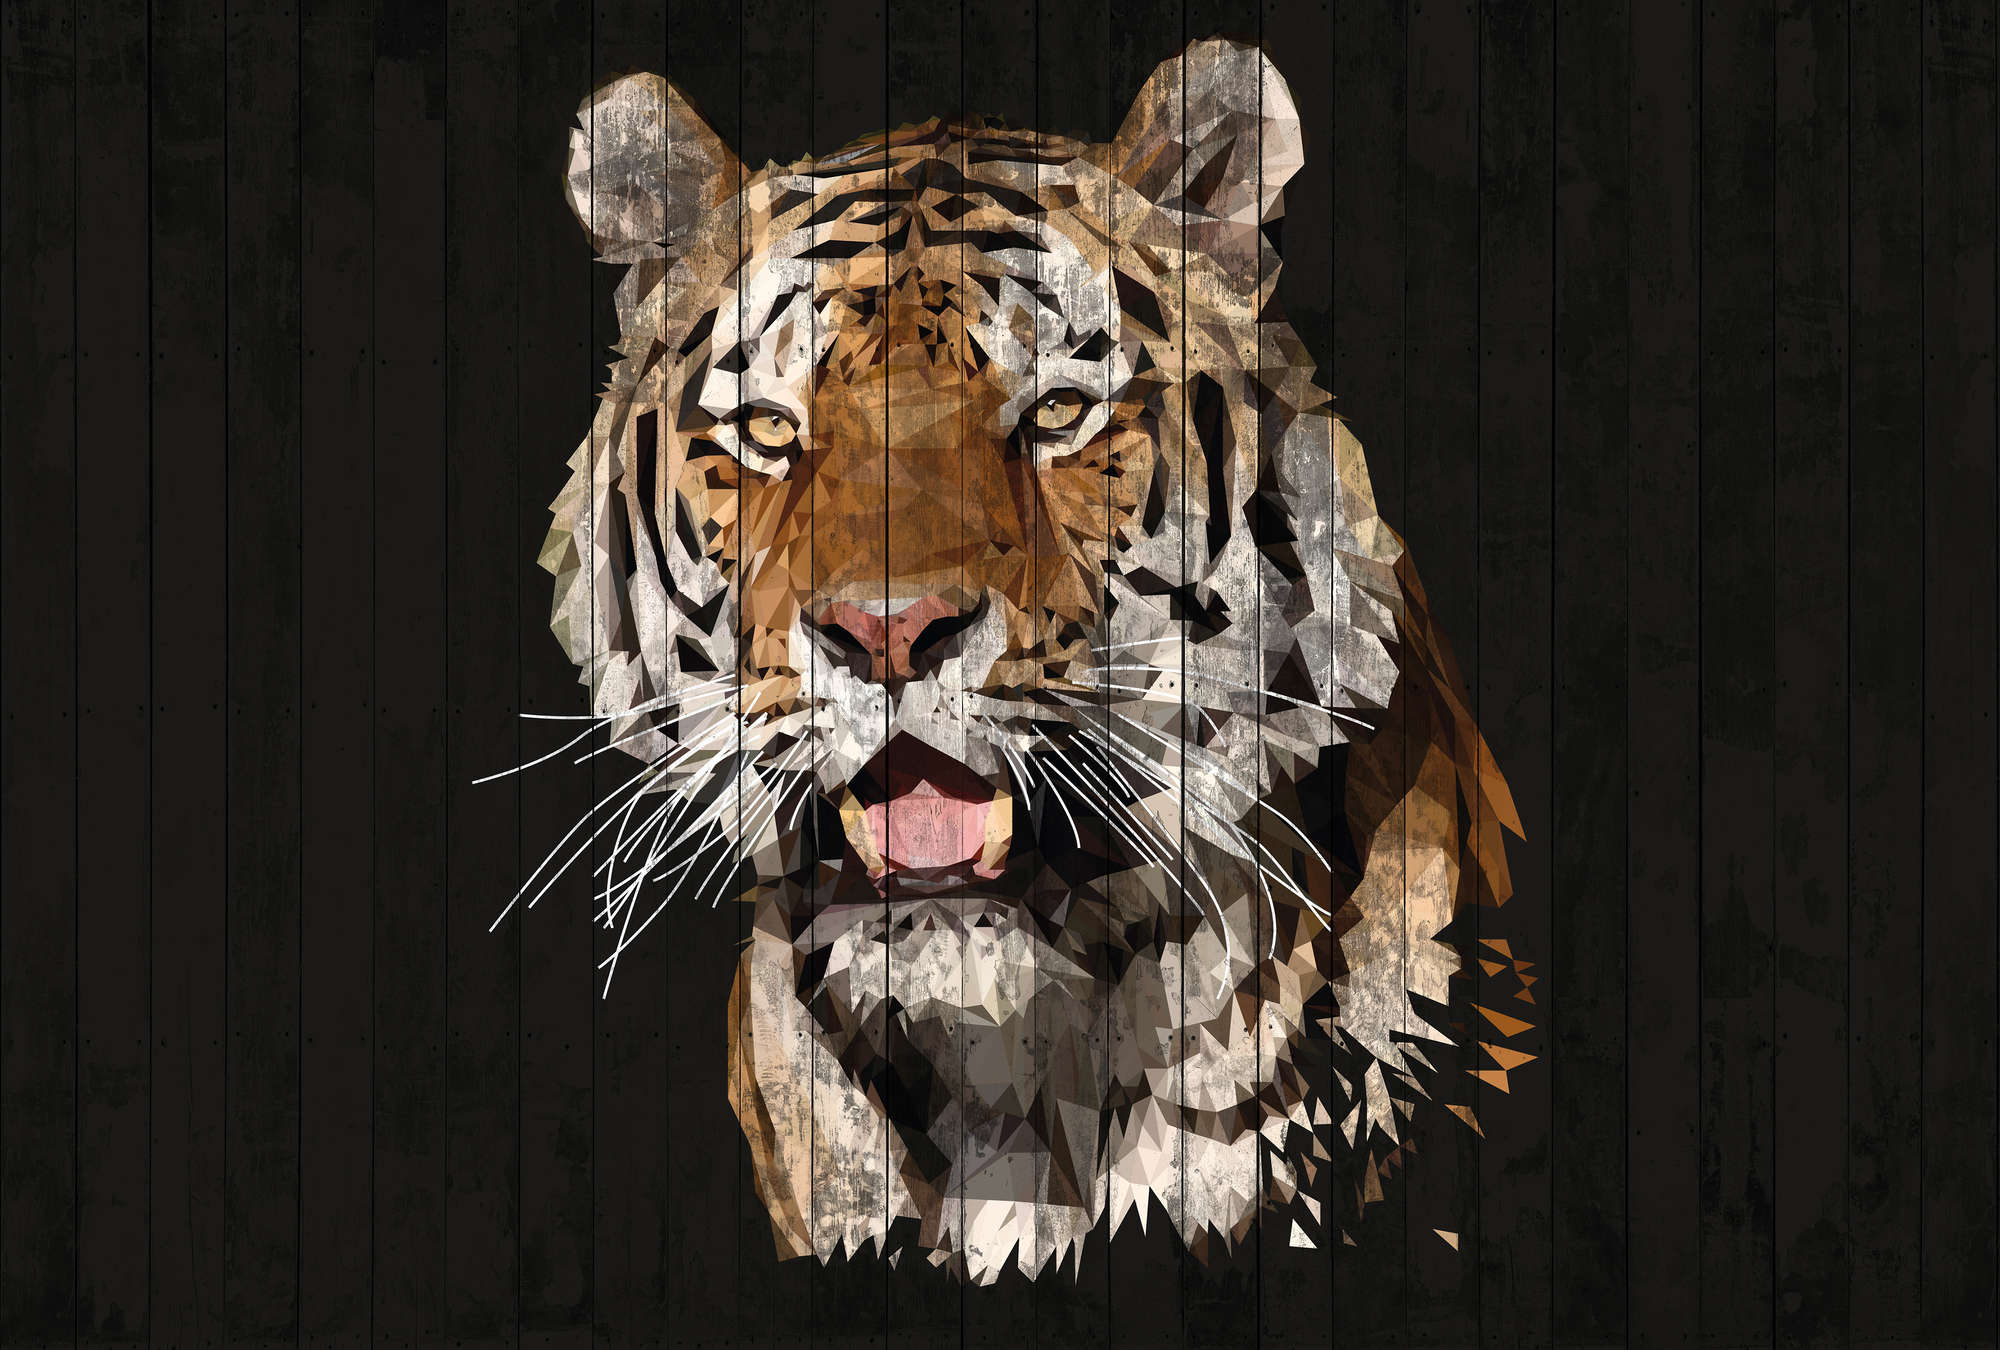             Photo wallpaper tiger with wood look & polygon style - Brown, White, Black
        